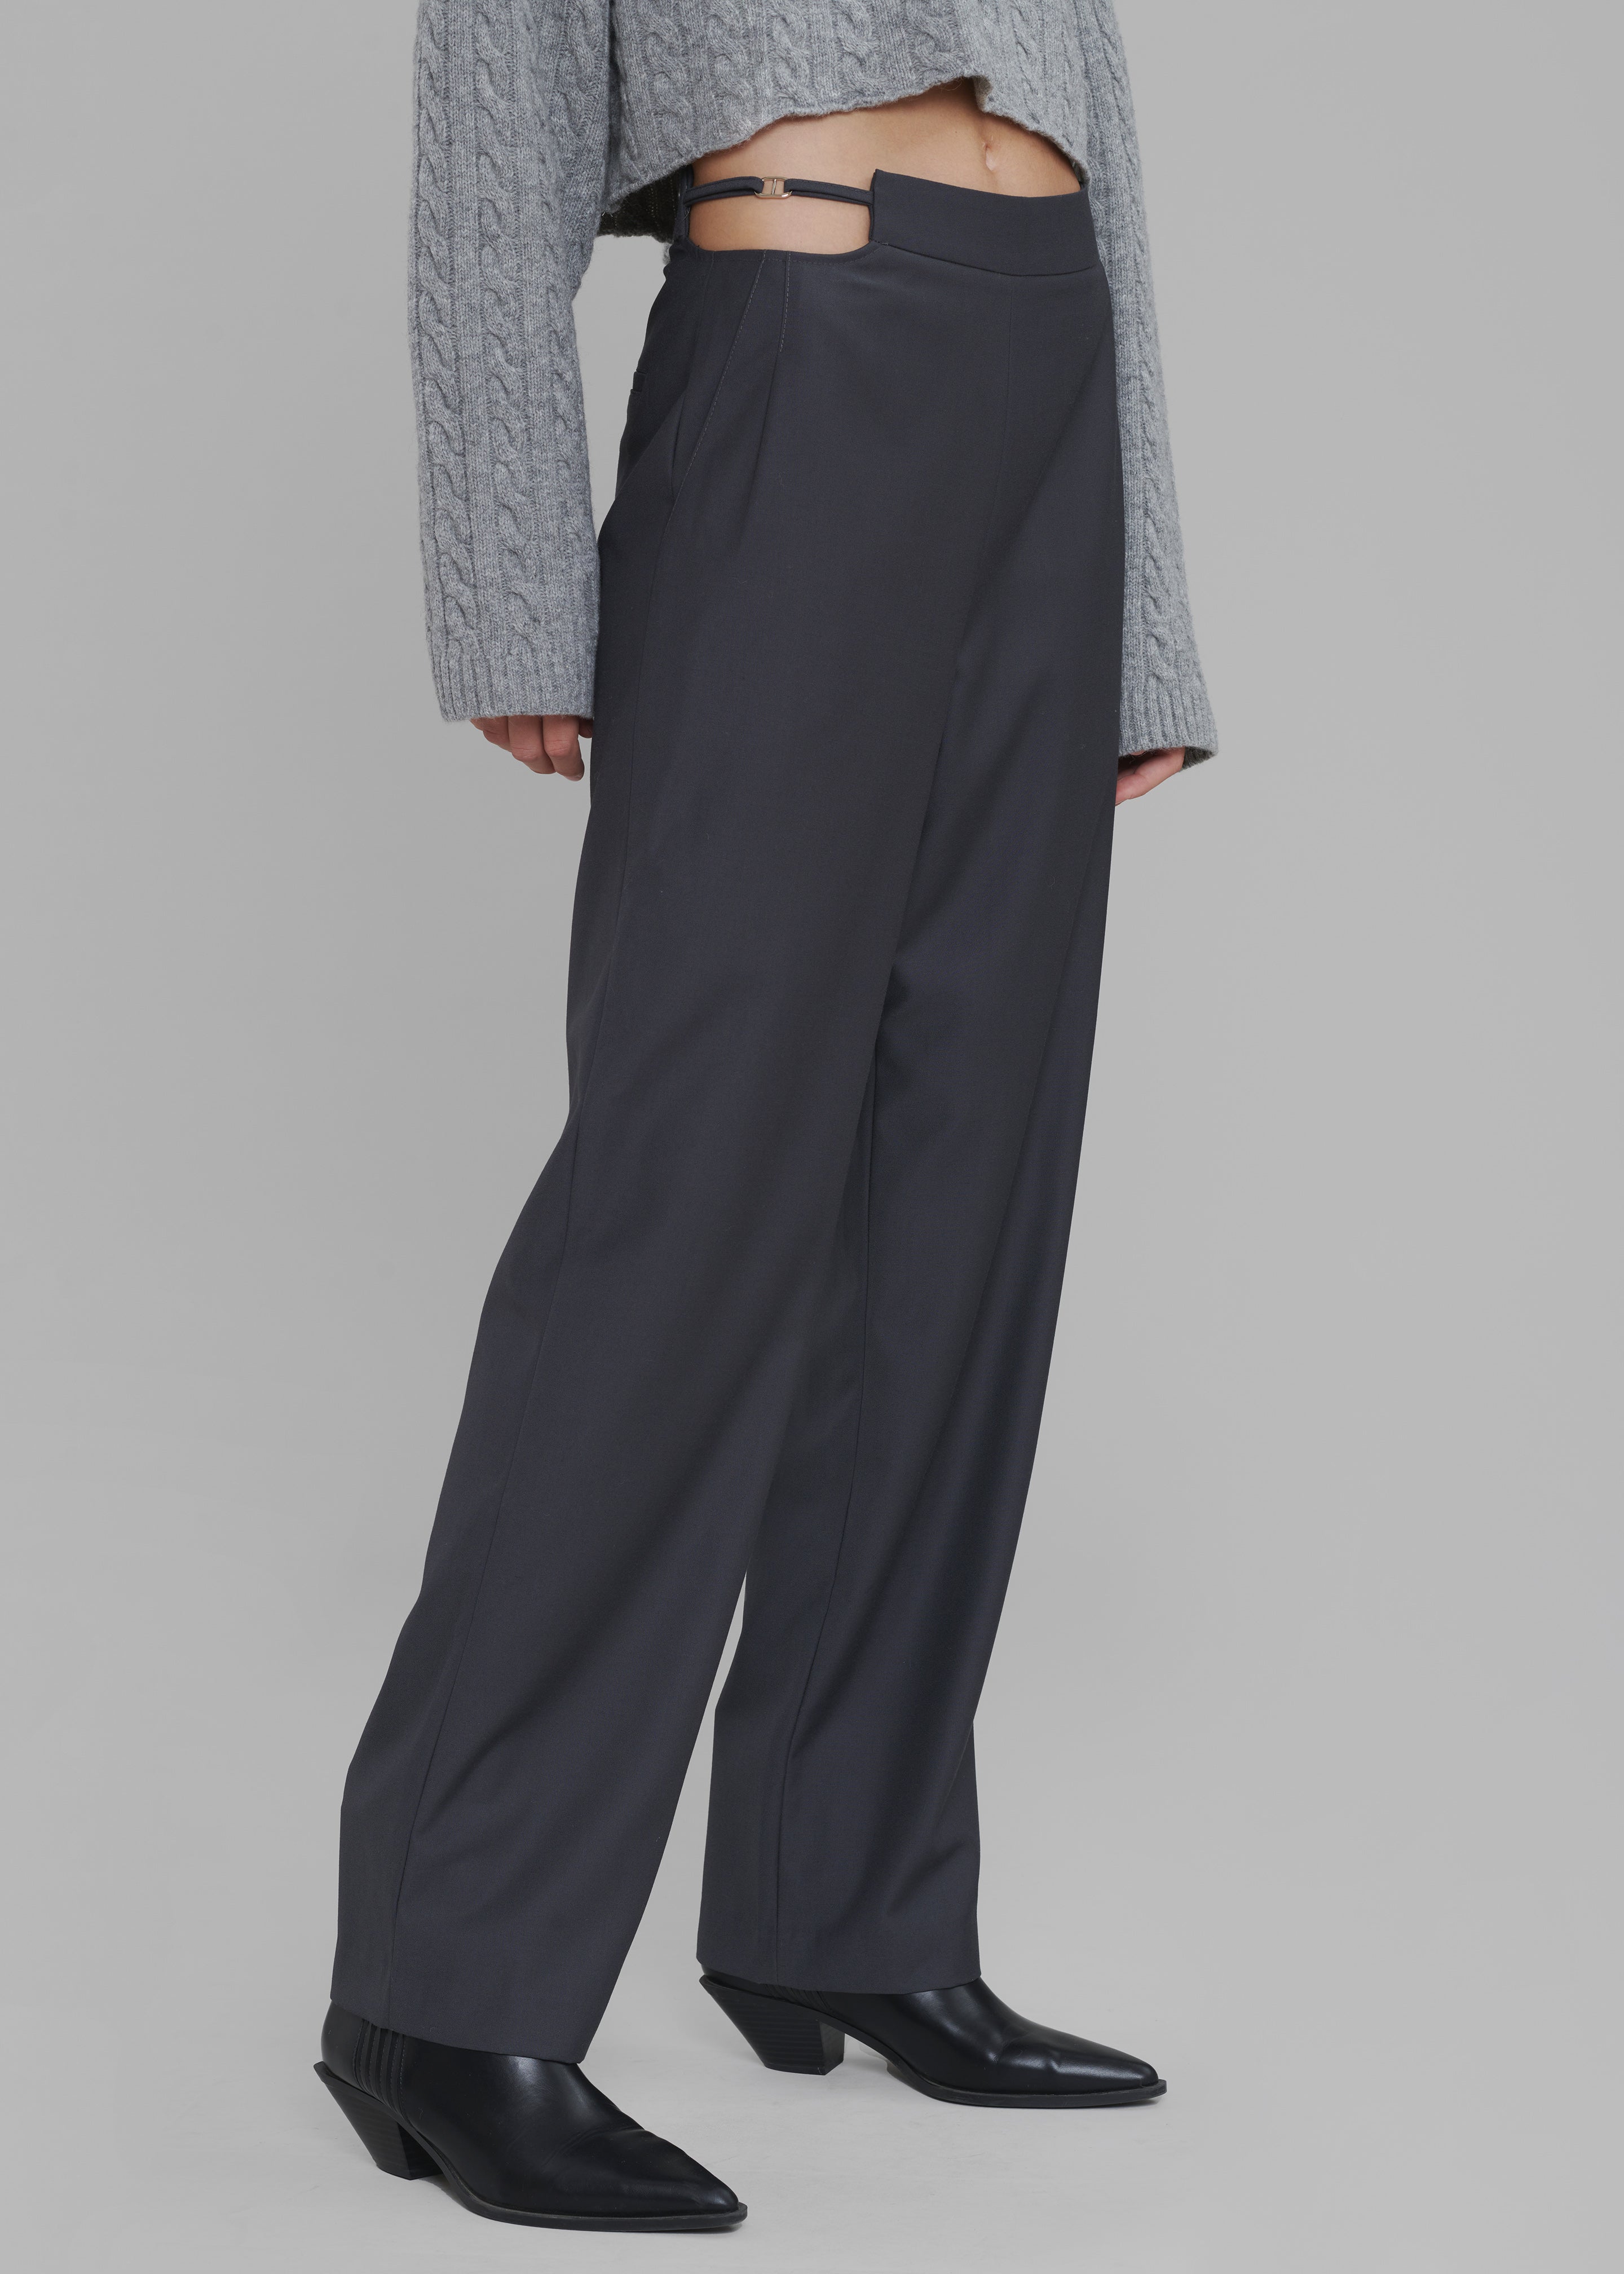 Louise Cut Out Trousers - Charcoal - 4